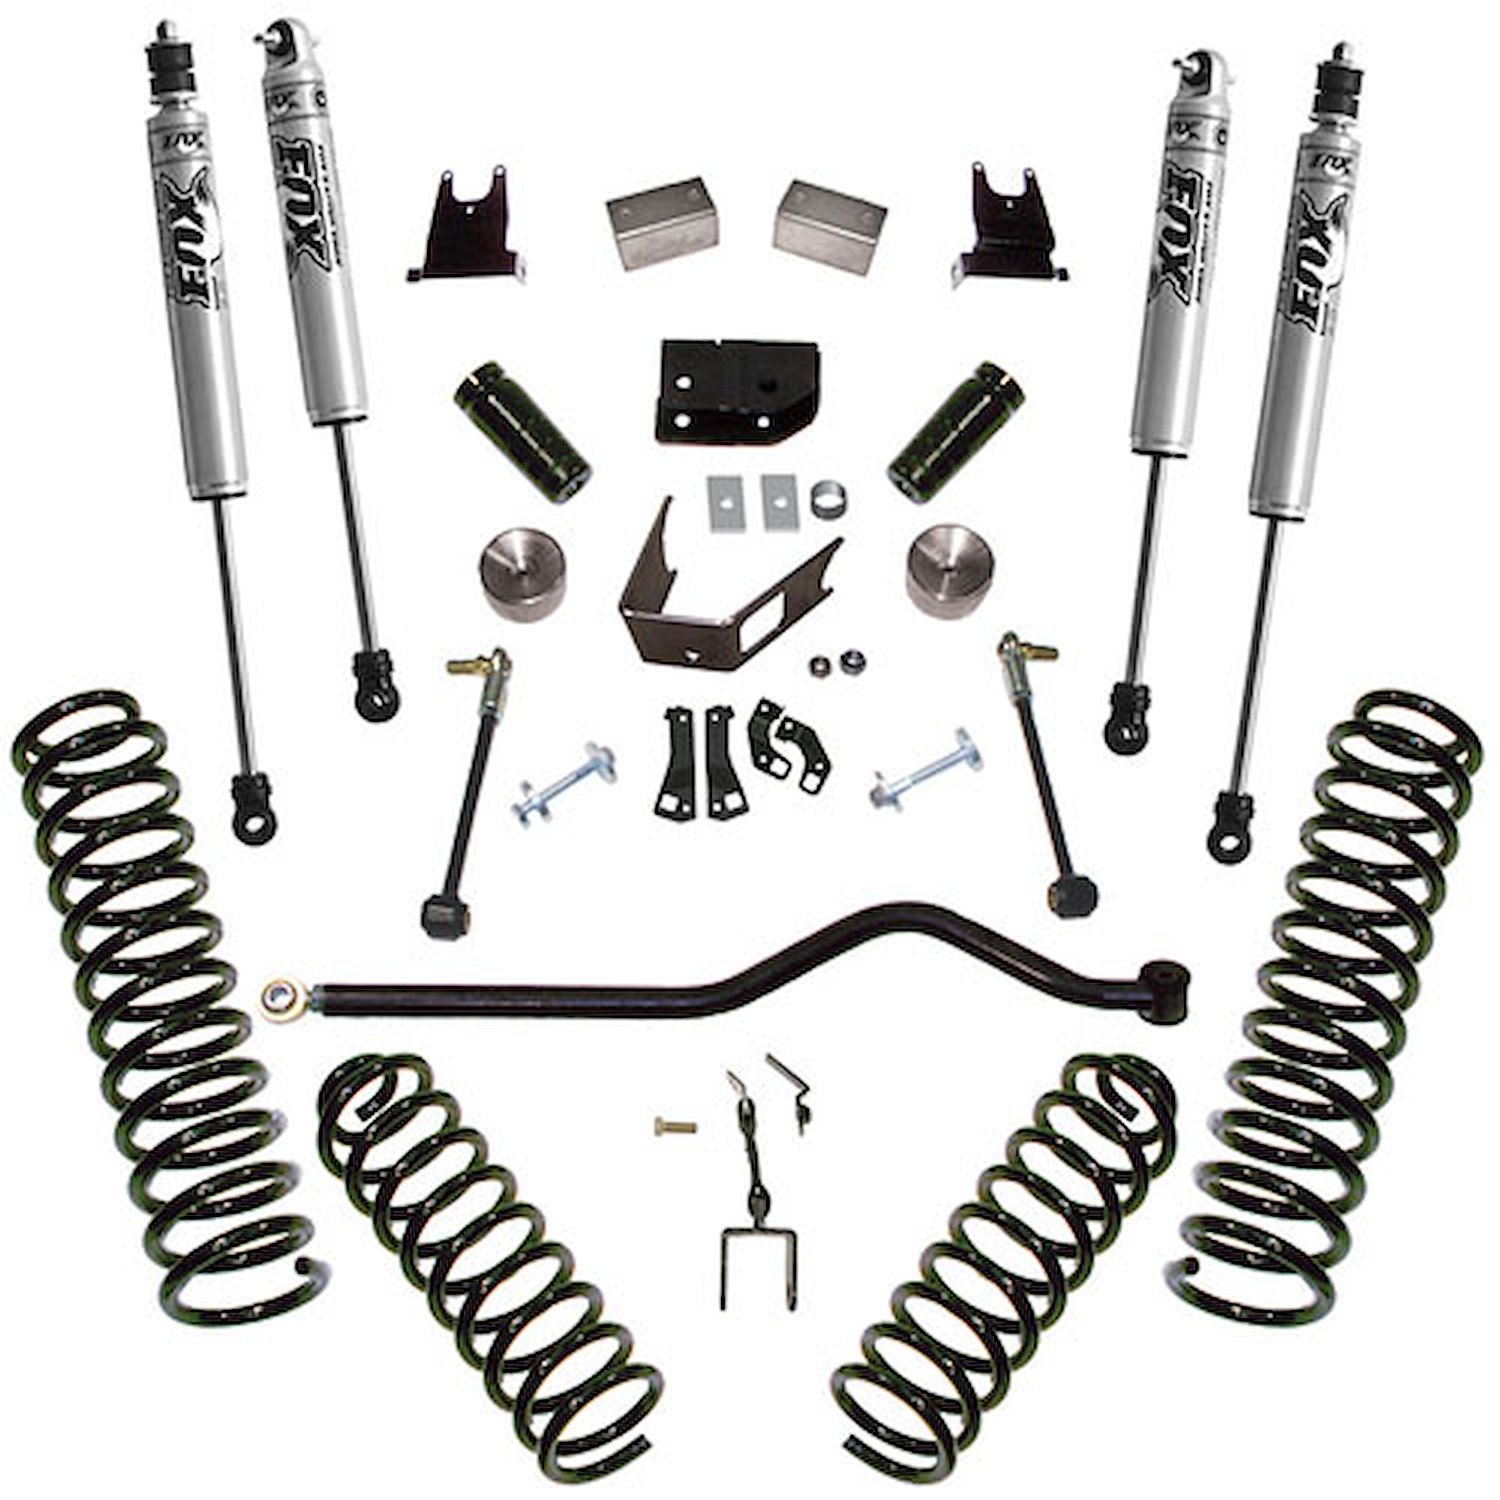 K928F Front and Rear Suspension Lift Kit, Lift Amount: 4 in. Front/4 in. Rear